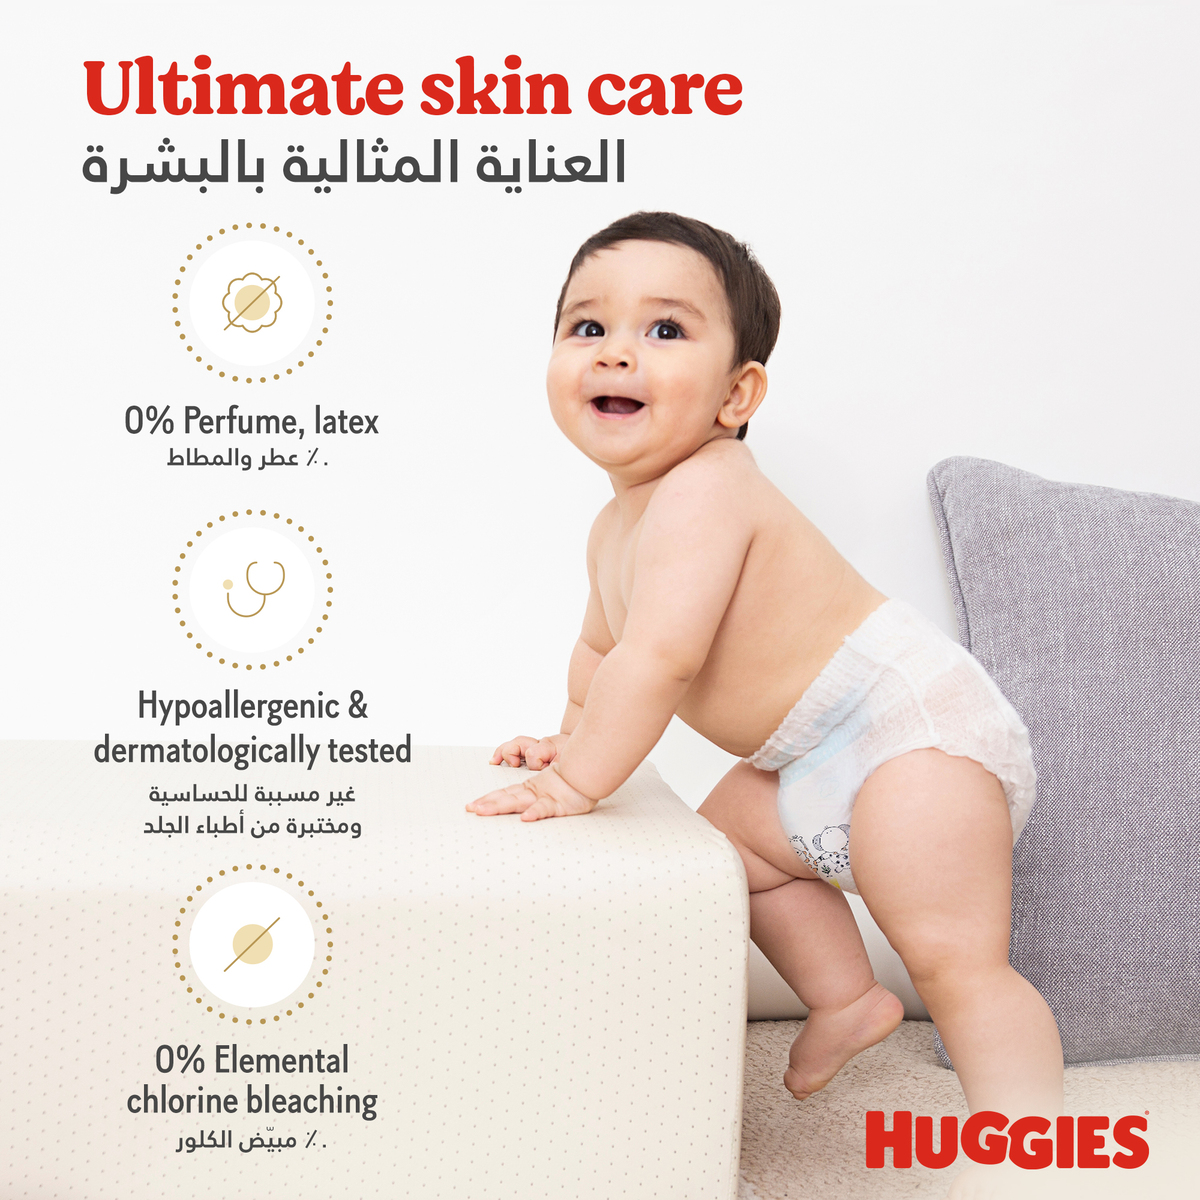 Huggies Extra Care Diapers Size 5 X Large 12-17 kg Value Pack 34 pcs